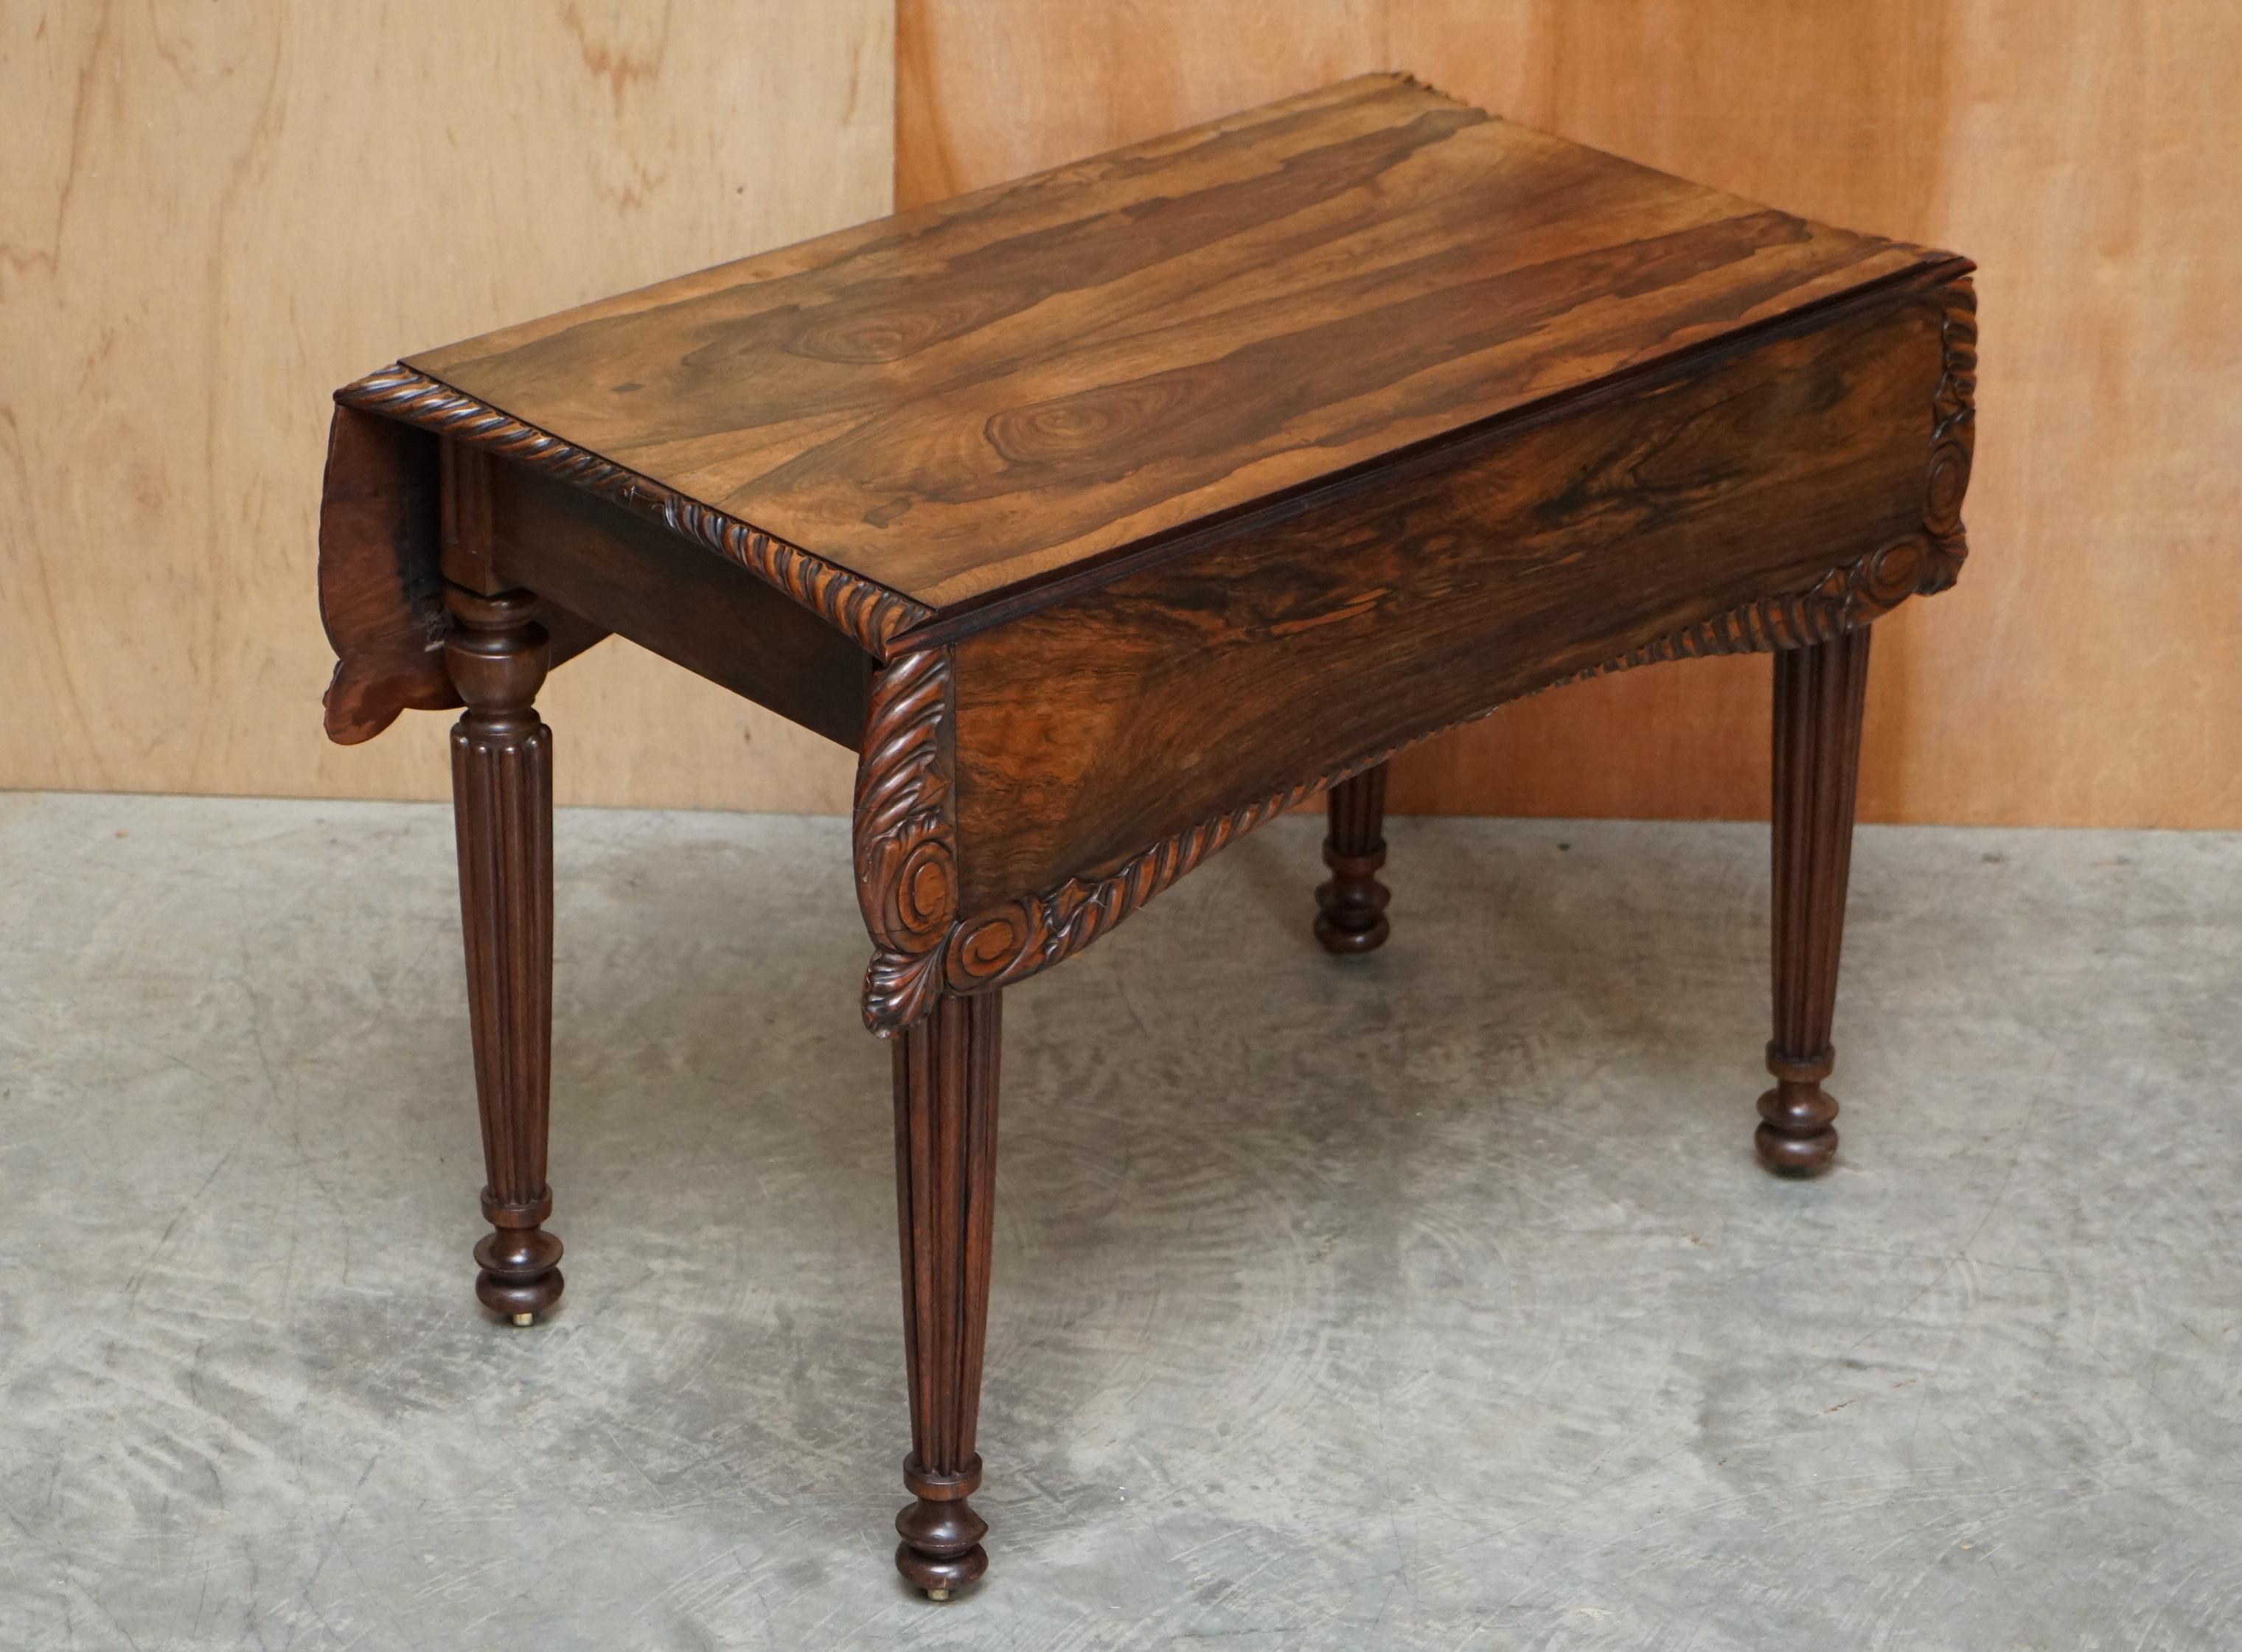 We are delighted to offer for sale this very well made and important William IV Rosewood Pembroke table with exquisite timbers and ornate carvings 

This is a wonderful find, most likely made by Gillows based on the quality, timber and detail to